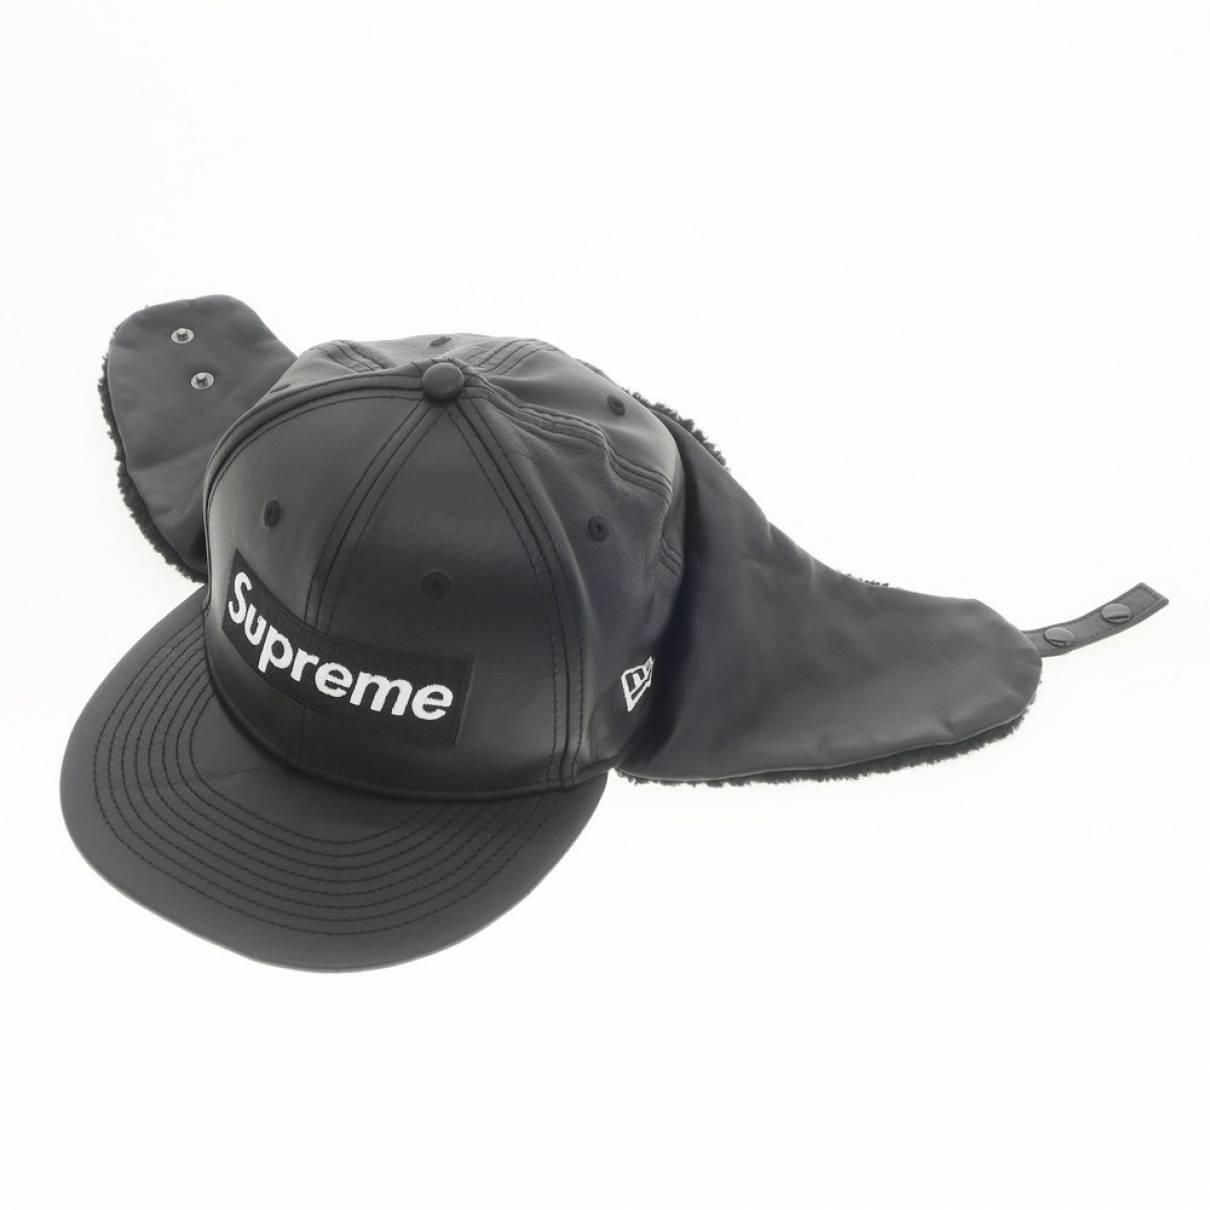 Leather hat Supreme Black size 60 cm in Leather - 33548615